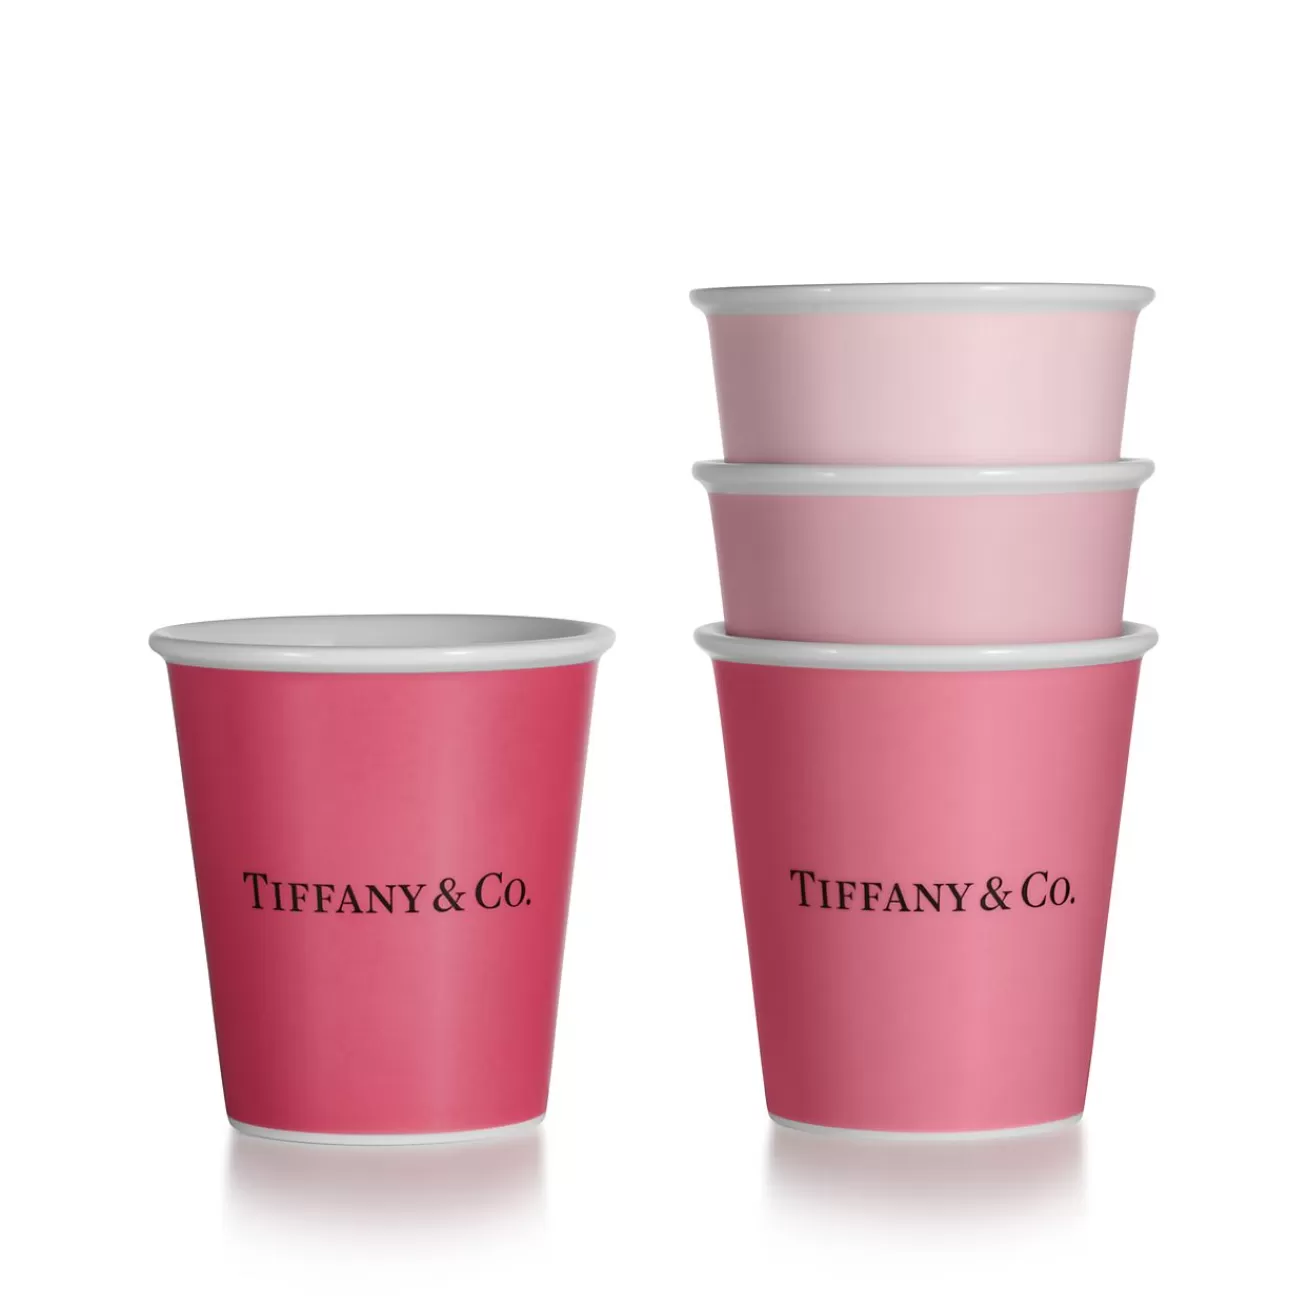 Tiffany & Co. Tiffany Cups Tiffany Coffee Cups in Bone China, Set of Four | ^ The Home | Housewarming Gifts